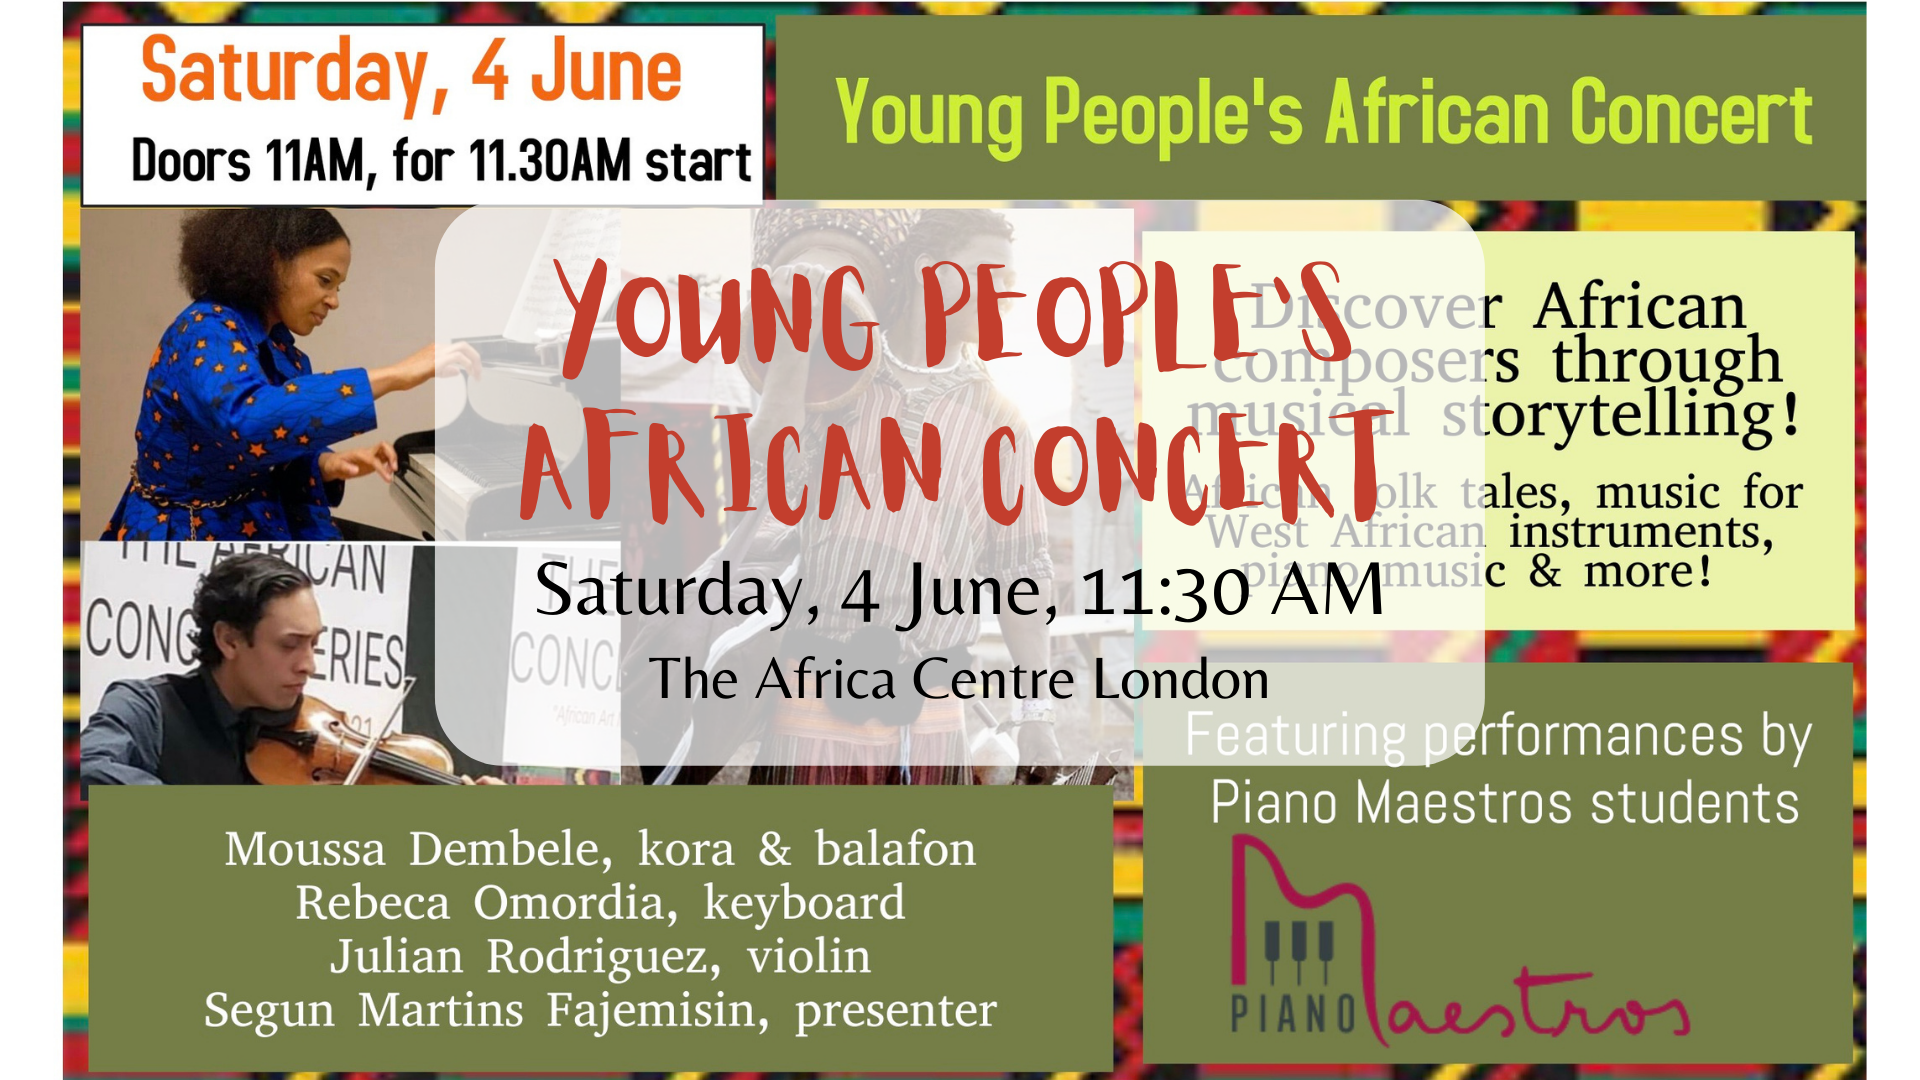 Concert pianist Rebeca Omordia, founder of the African Concert Series London, invites Piano Maestros students to perform as part of the African Concert Series programme.